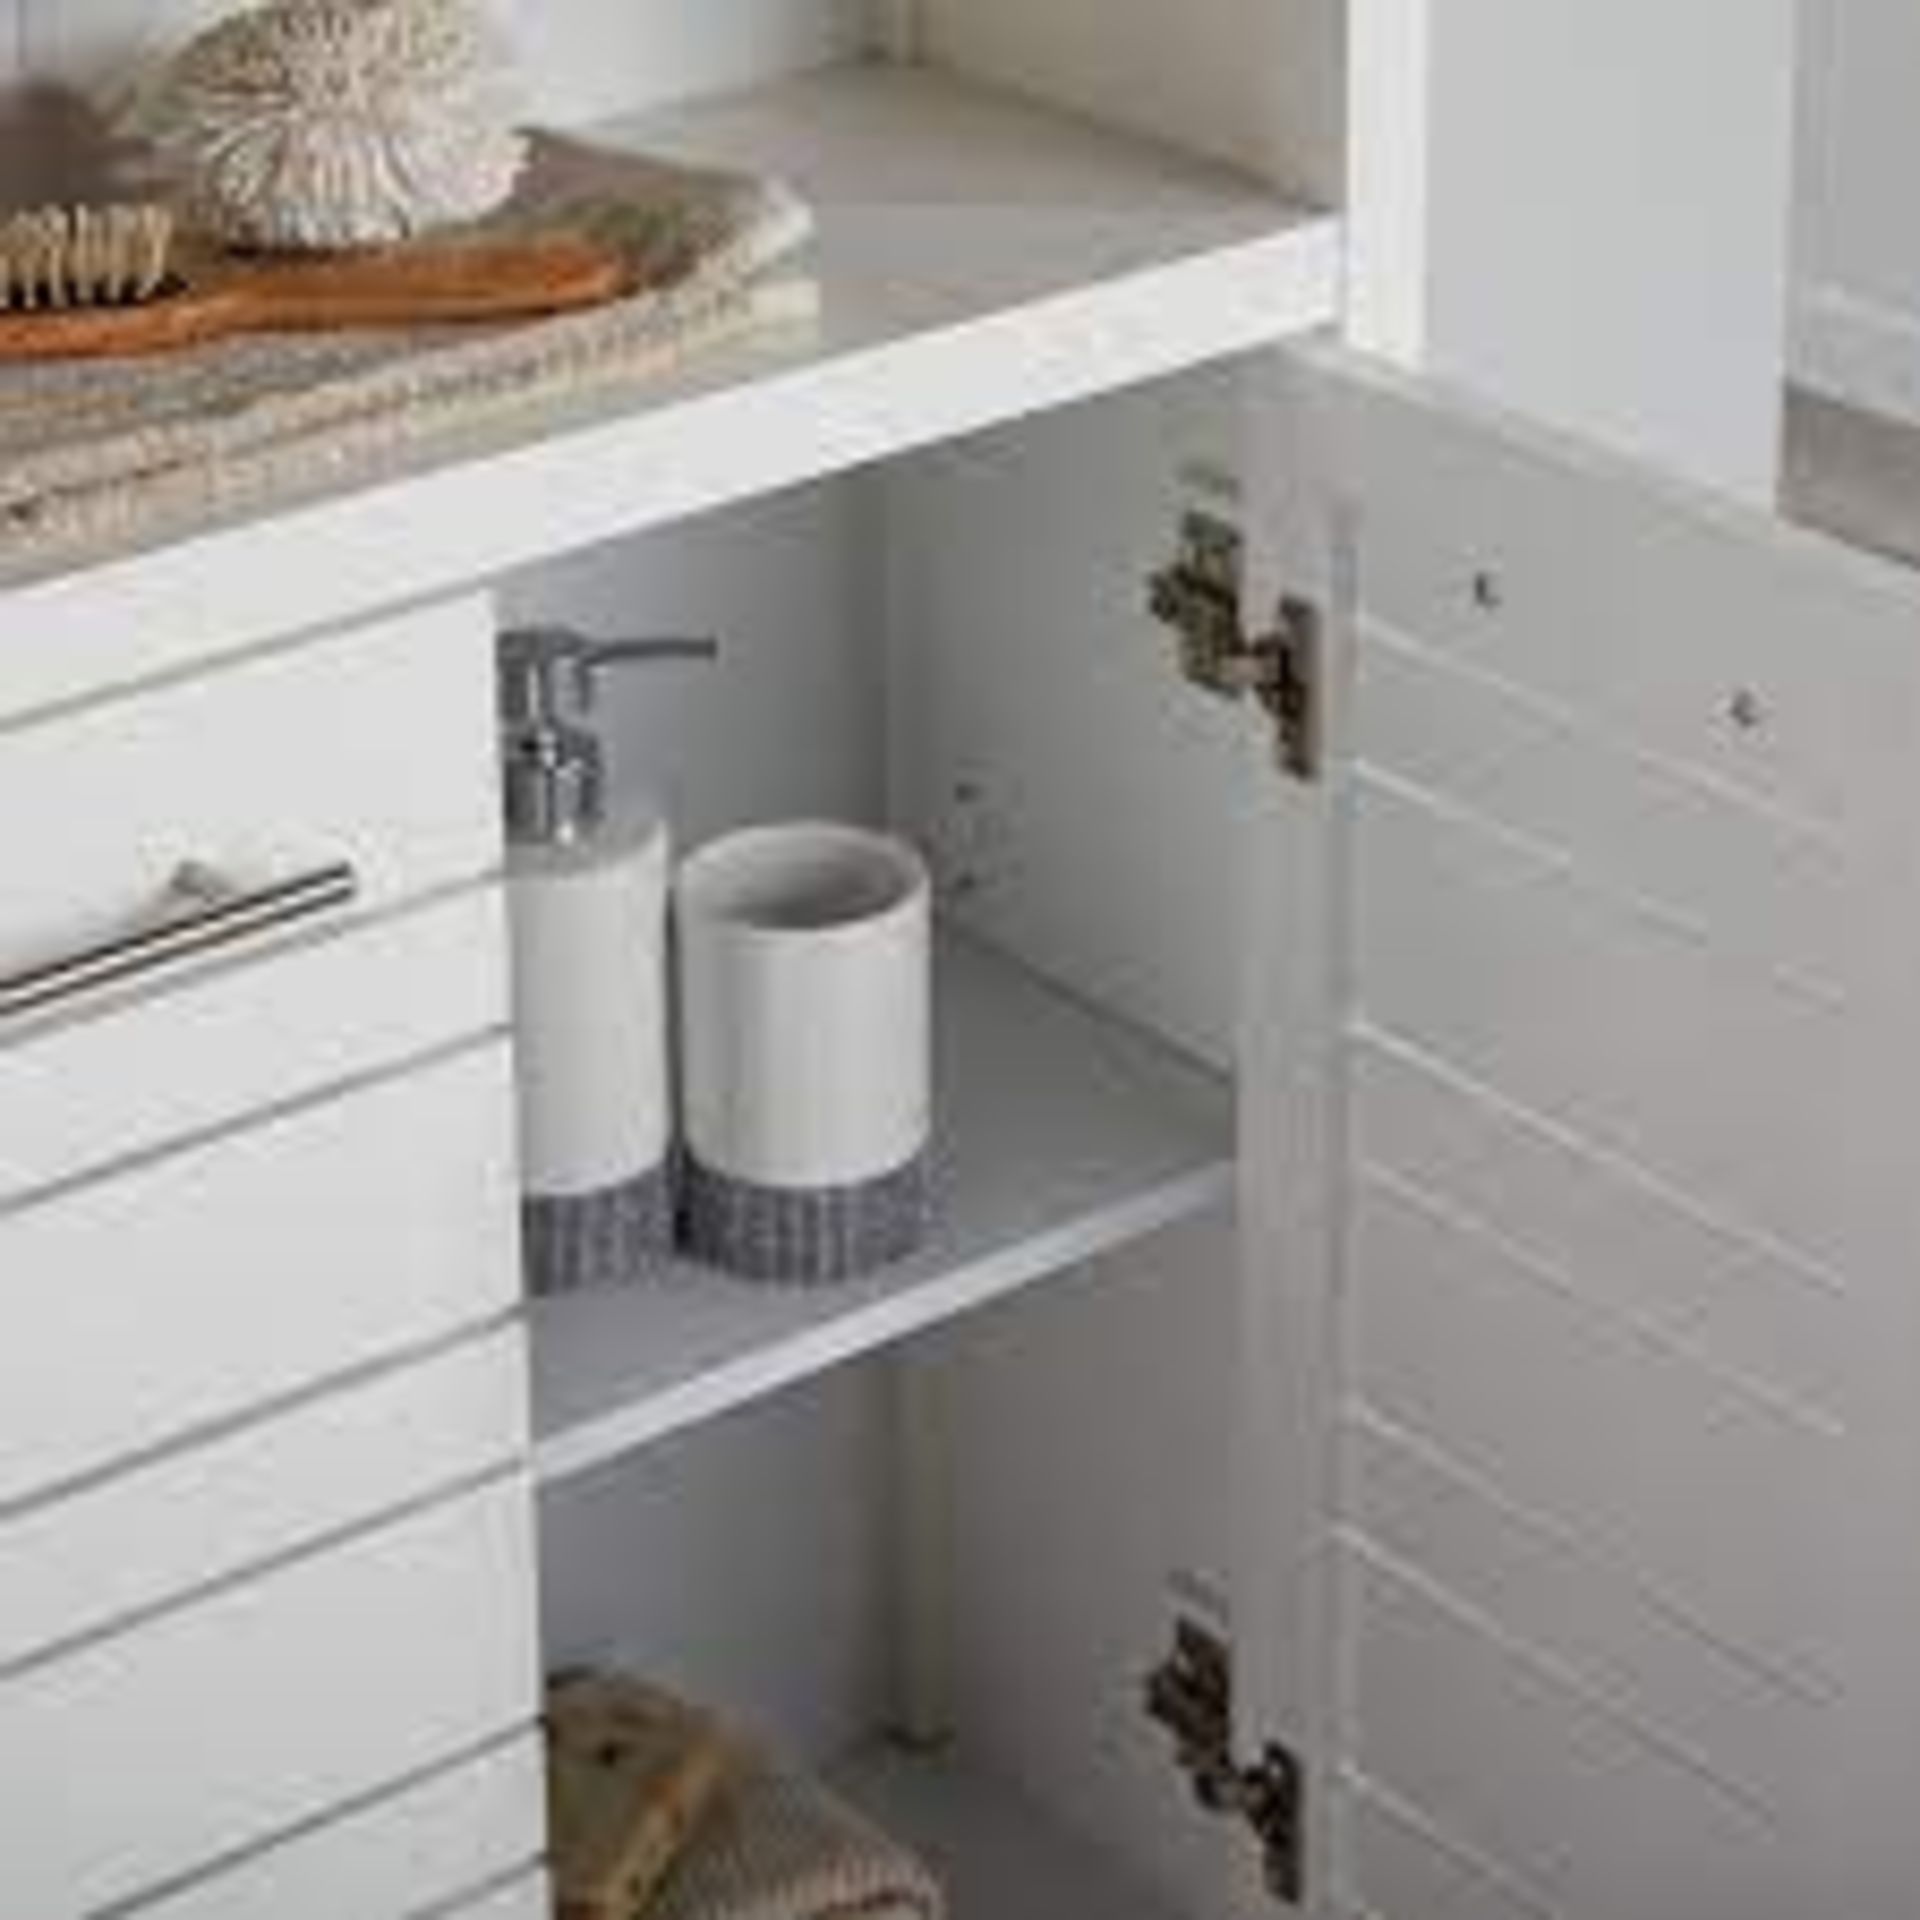 NEW BOXED Hertford Two-Tone White Double Door Storage Unit. The Two-Toned Bathroom Console Cabinet - Image 3 of 4